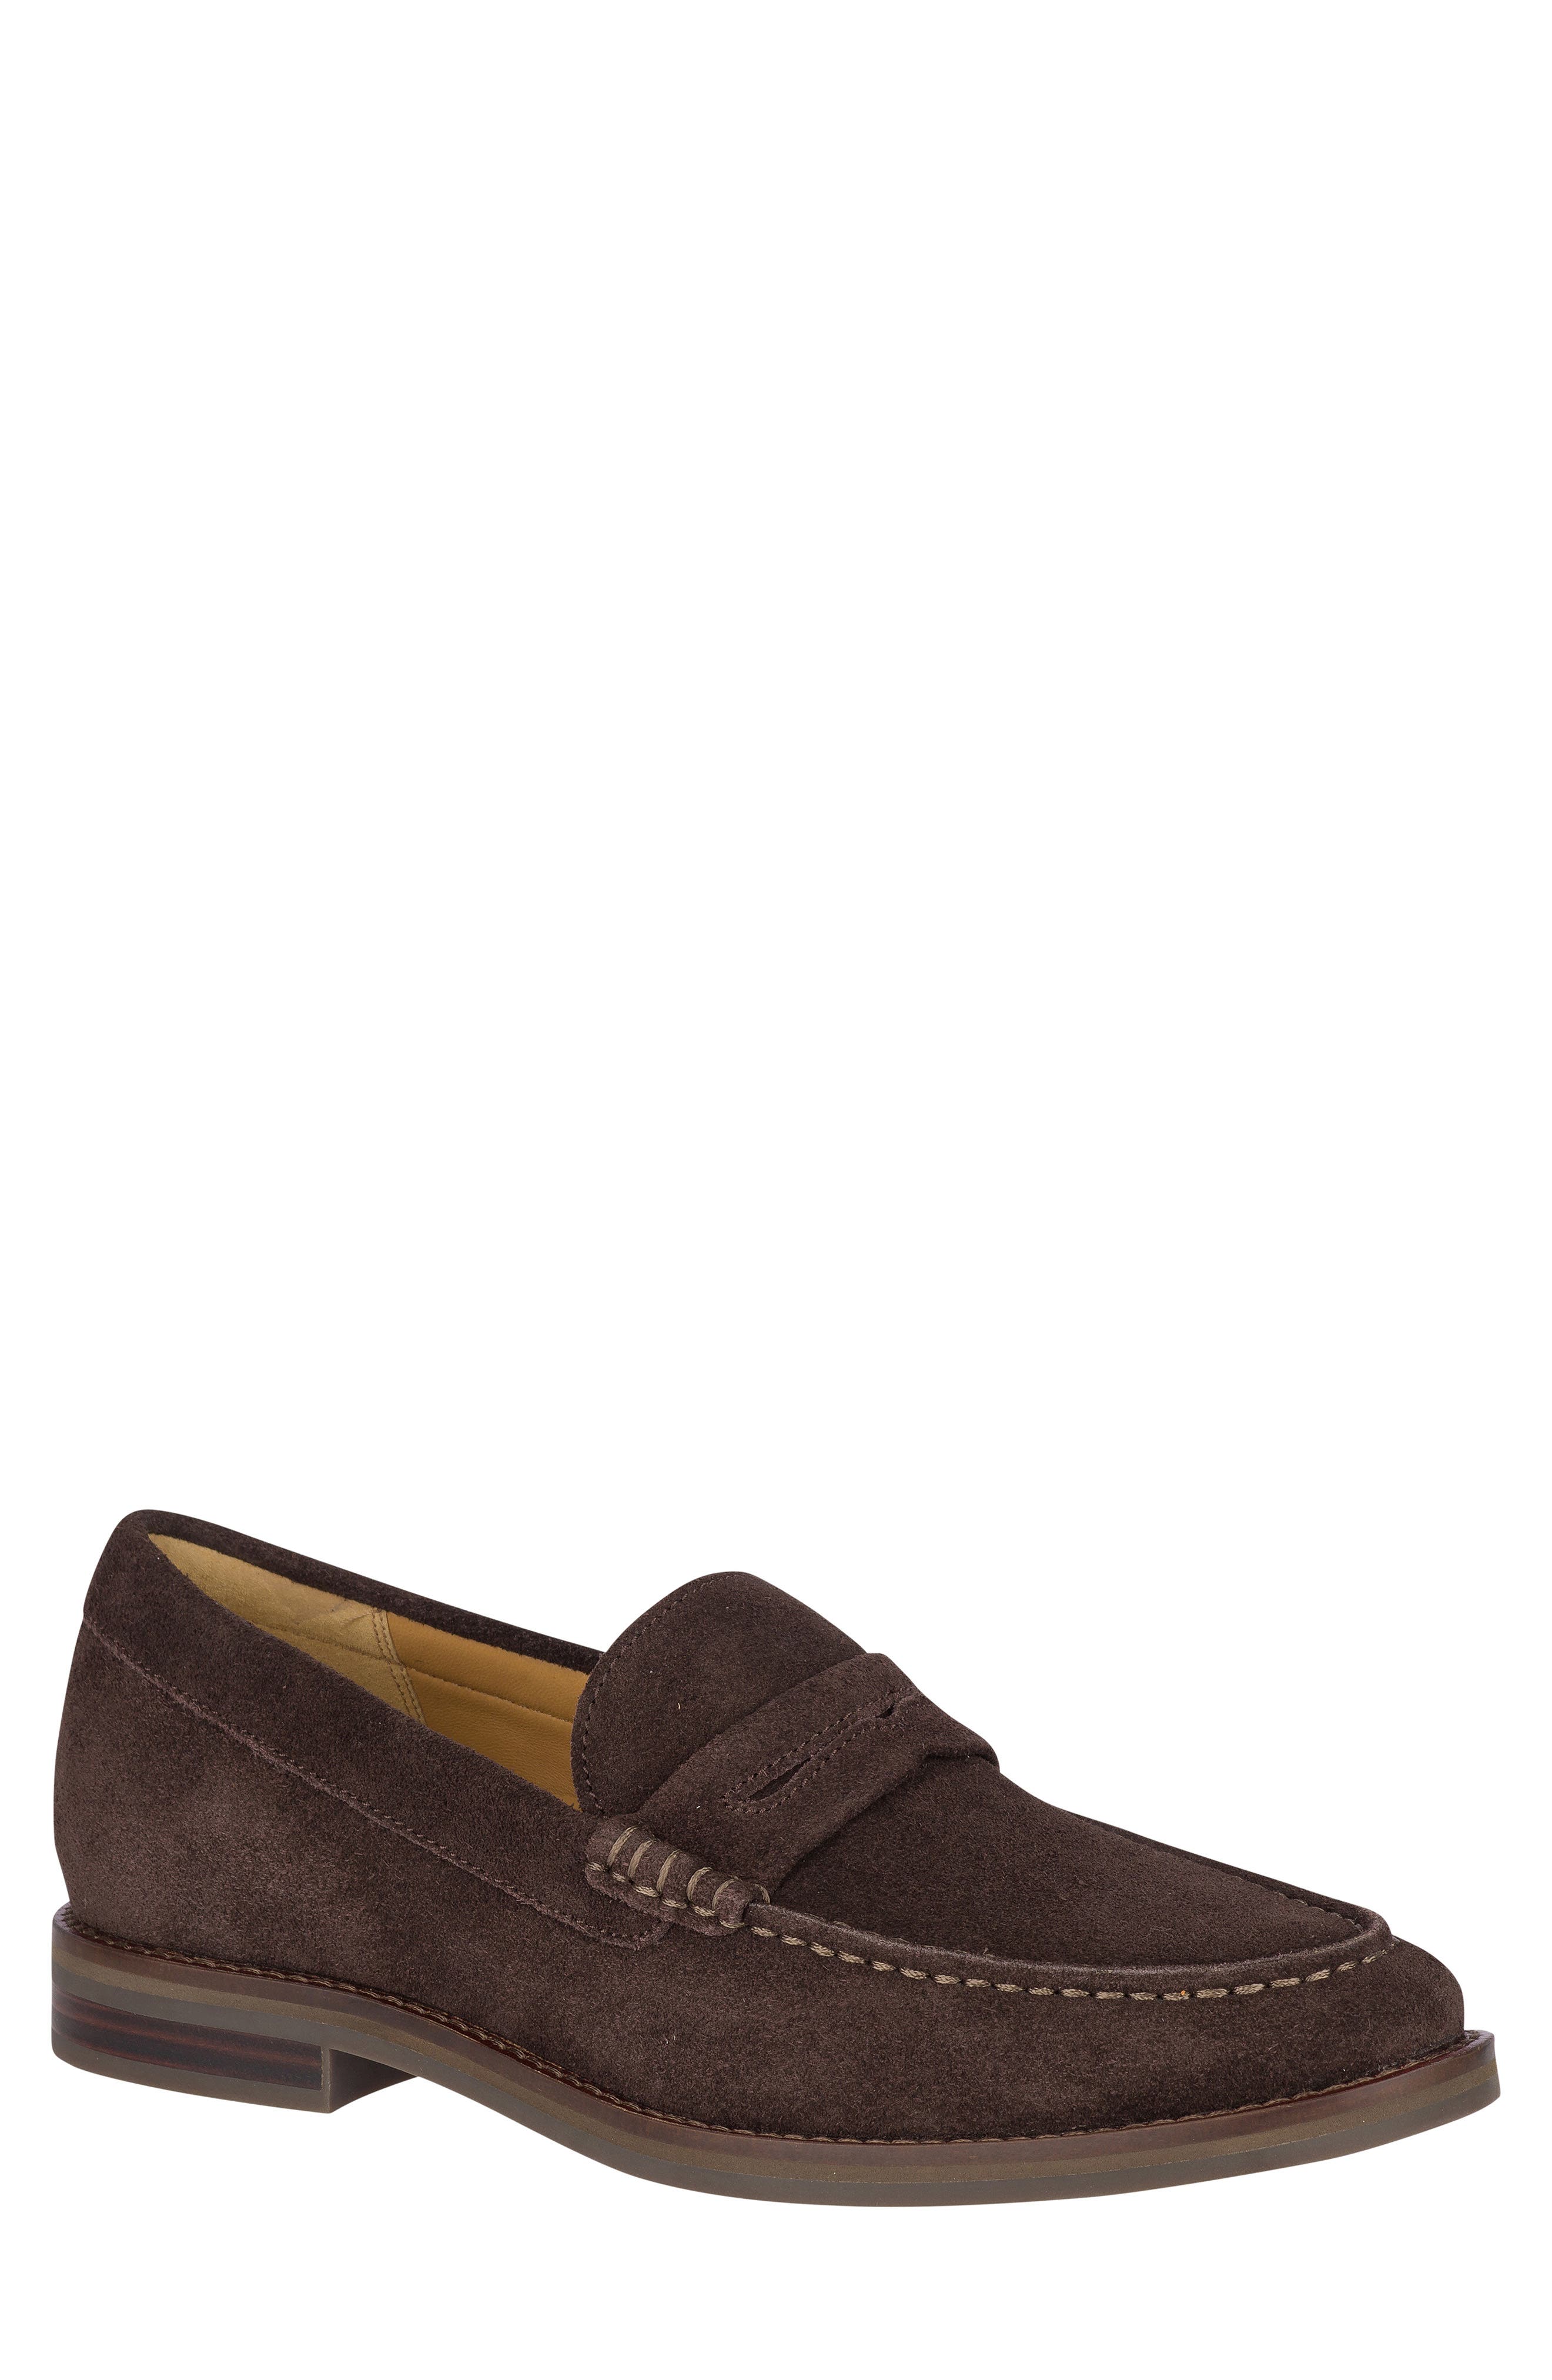 sperry gold cup penny loafer